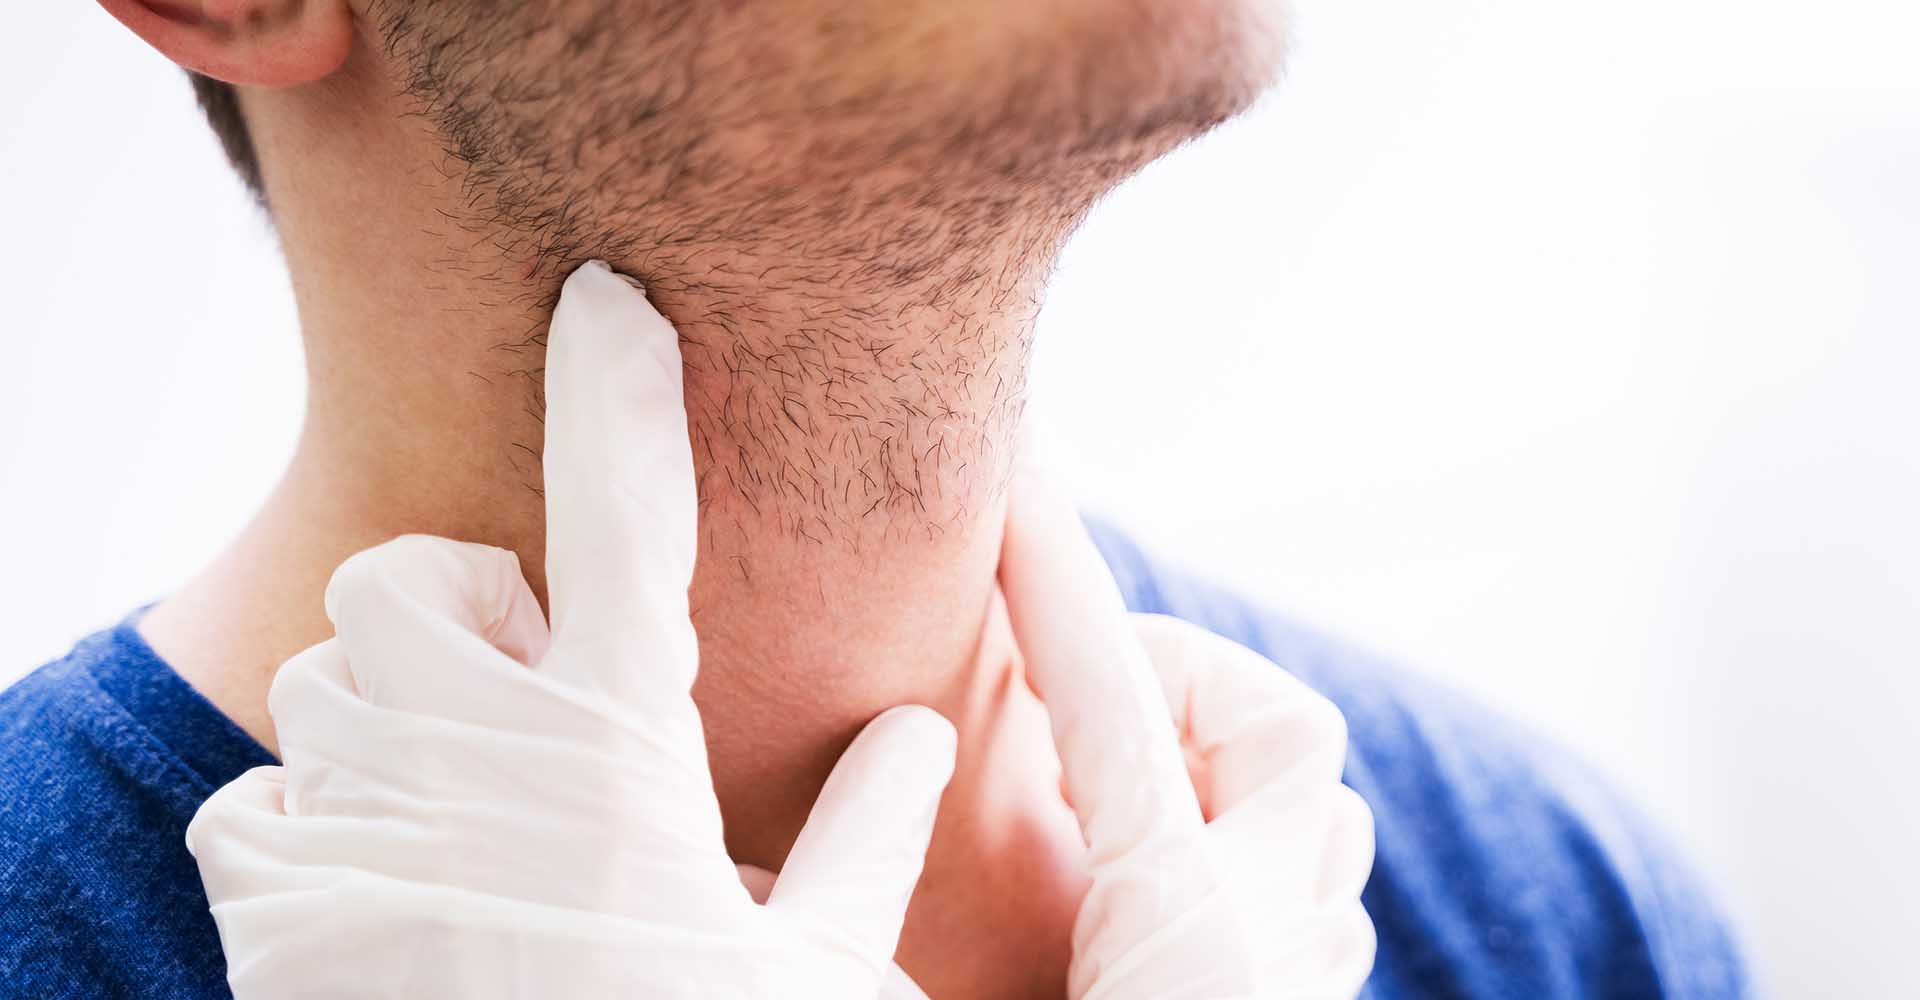 Doctor Performing Physical Exam Palpation Of The Thyroid Gland